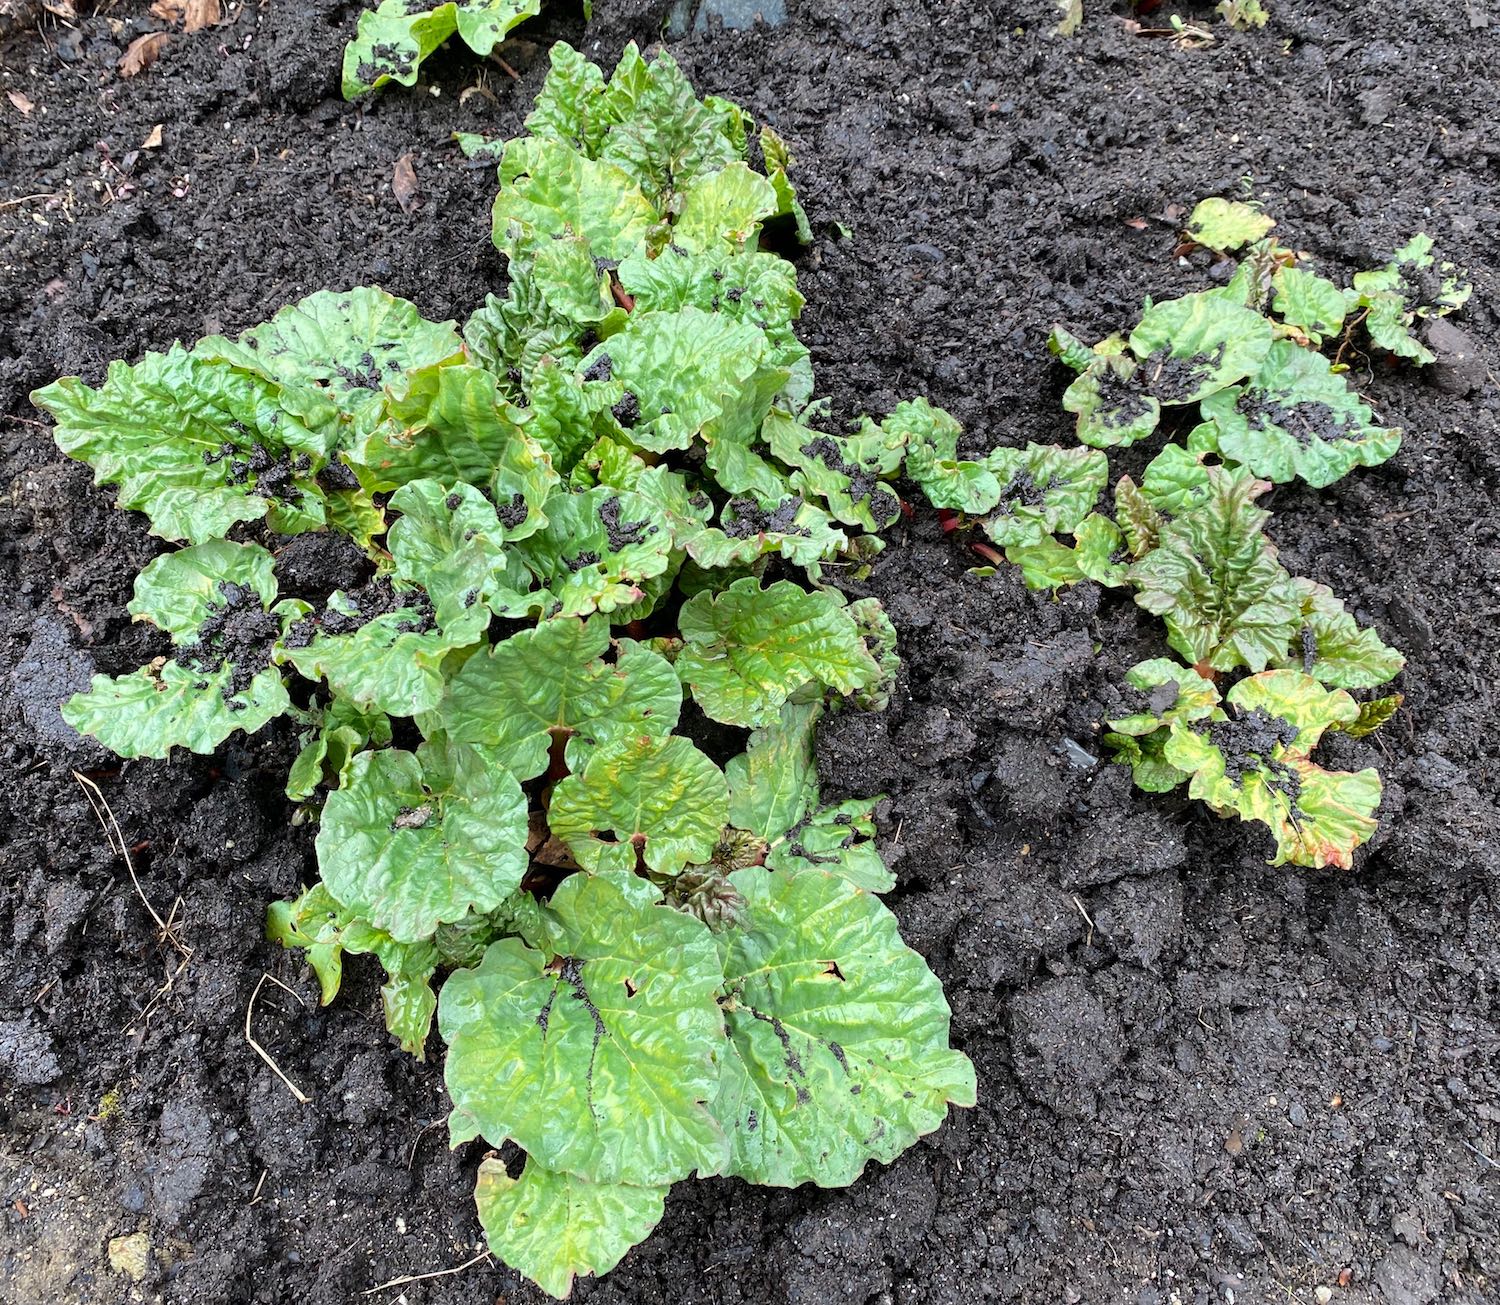 It's the weekend! Number 242, Rhubarb Plants in Their Freshly Composted Bed